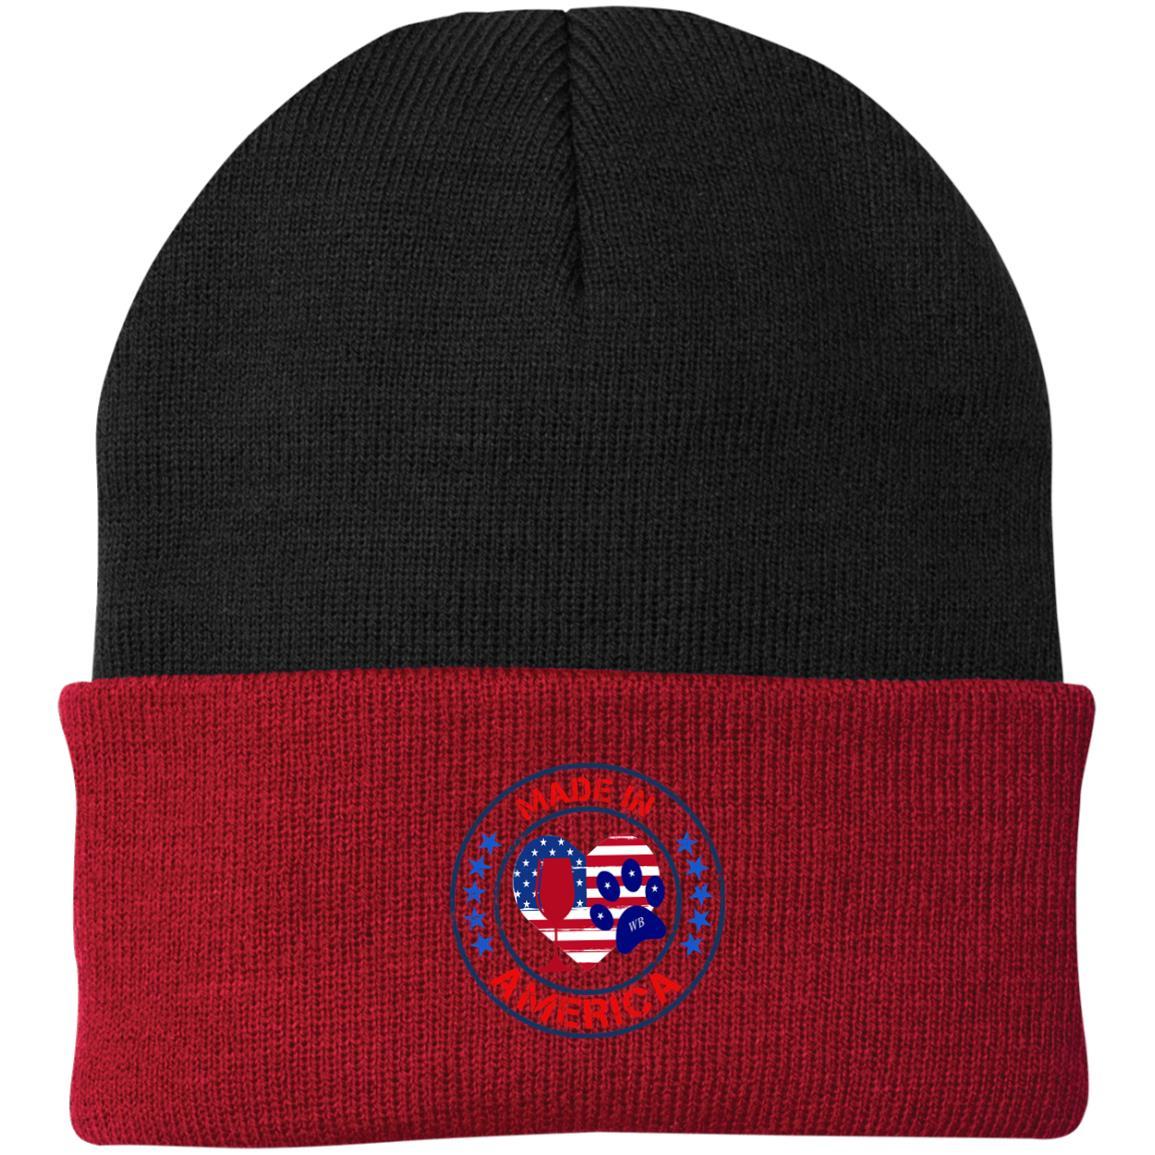 Hats Athletic Red/Black / One Size Winey Bitches Co "Made In America" Embroidered Knit Cap WineyBitchesCo